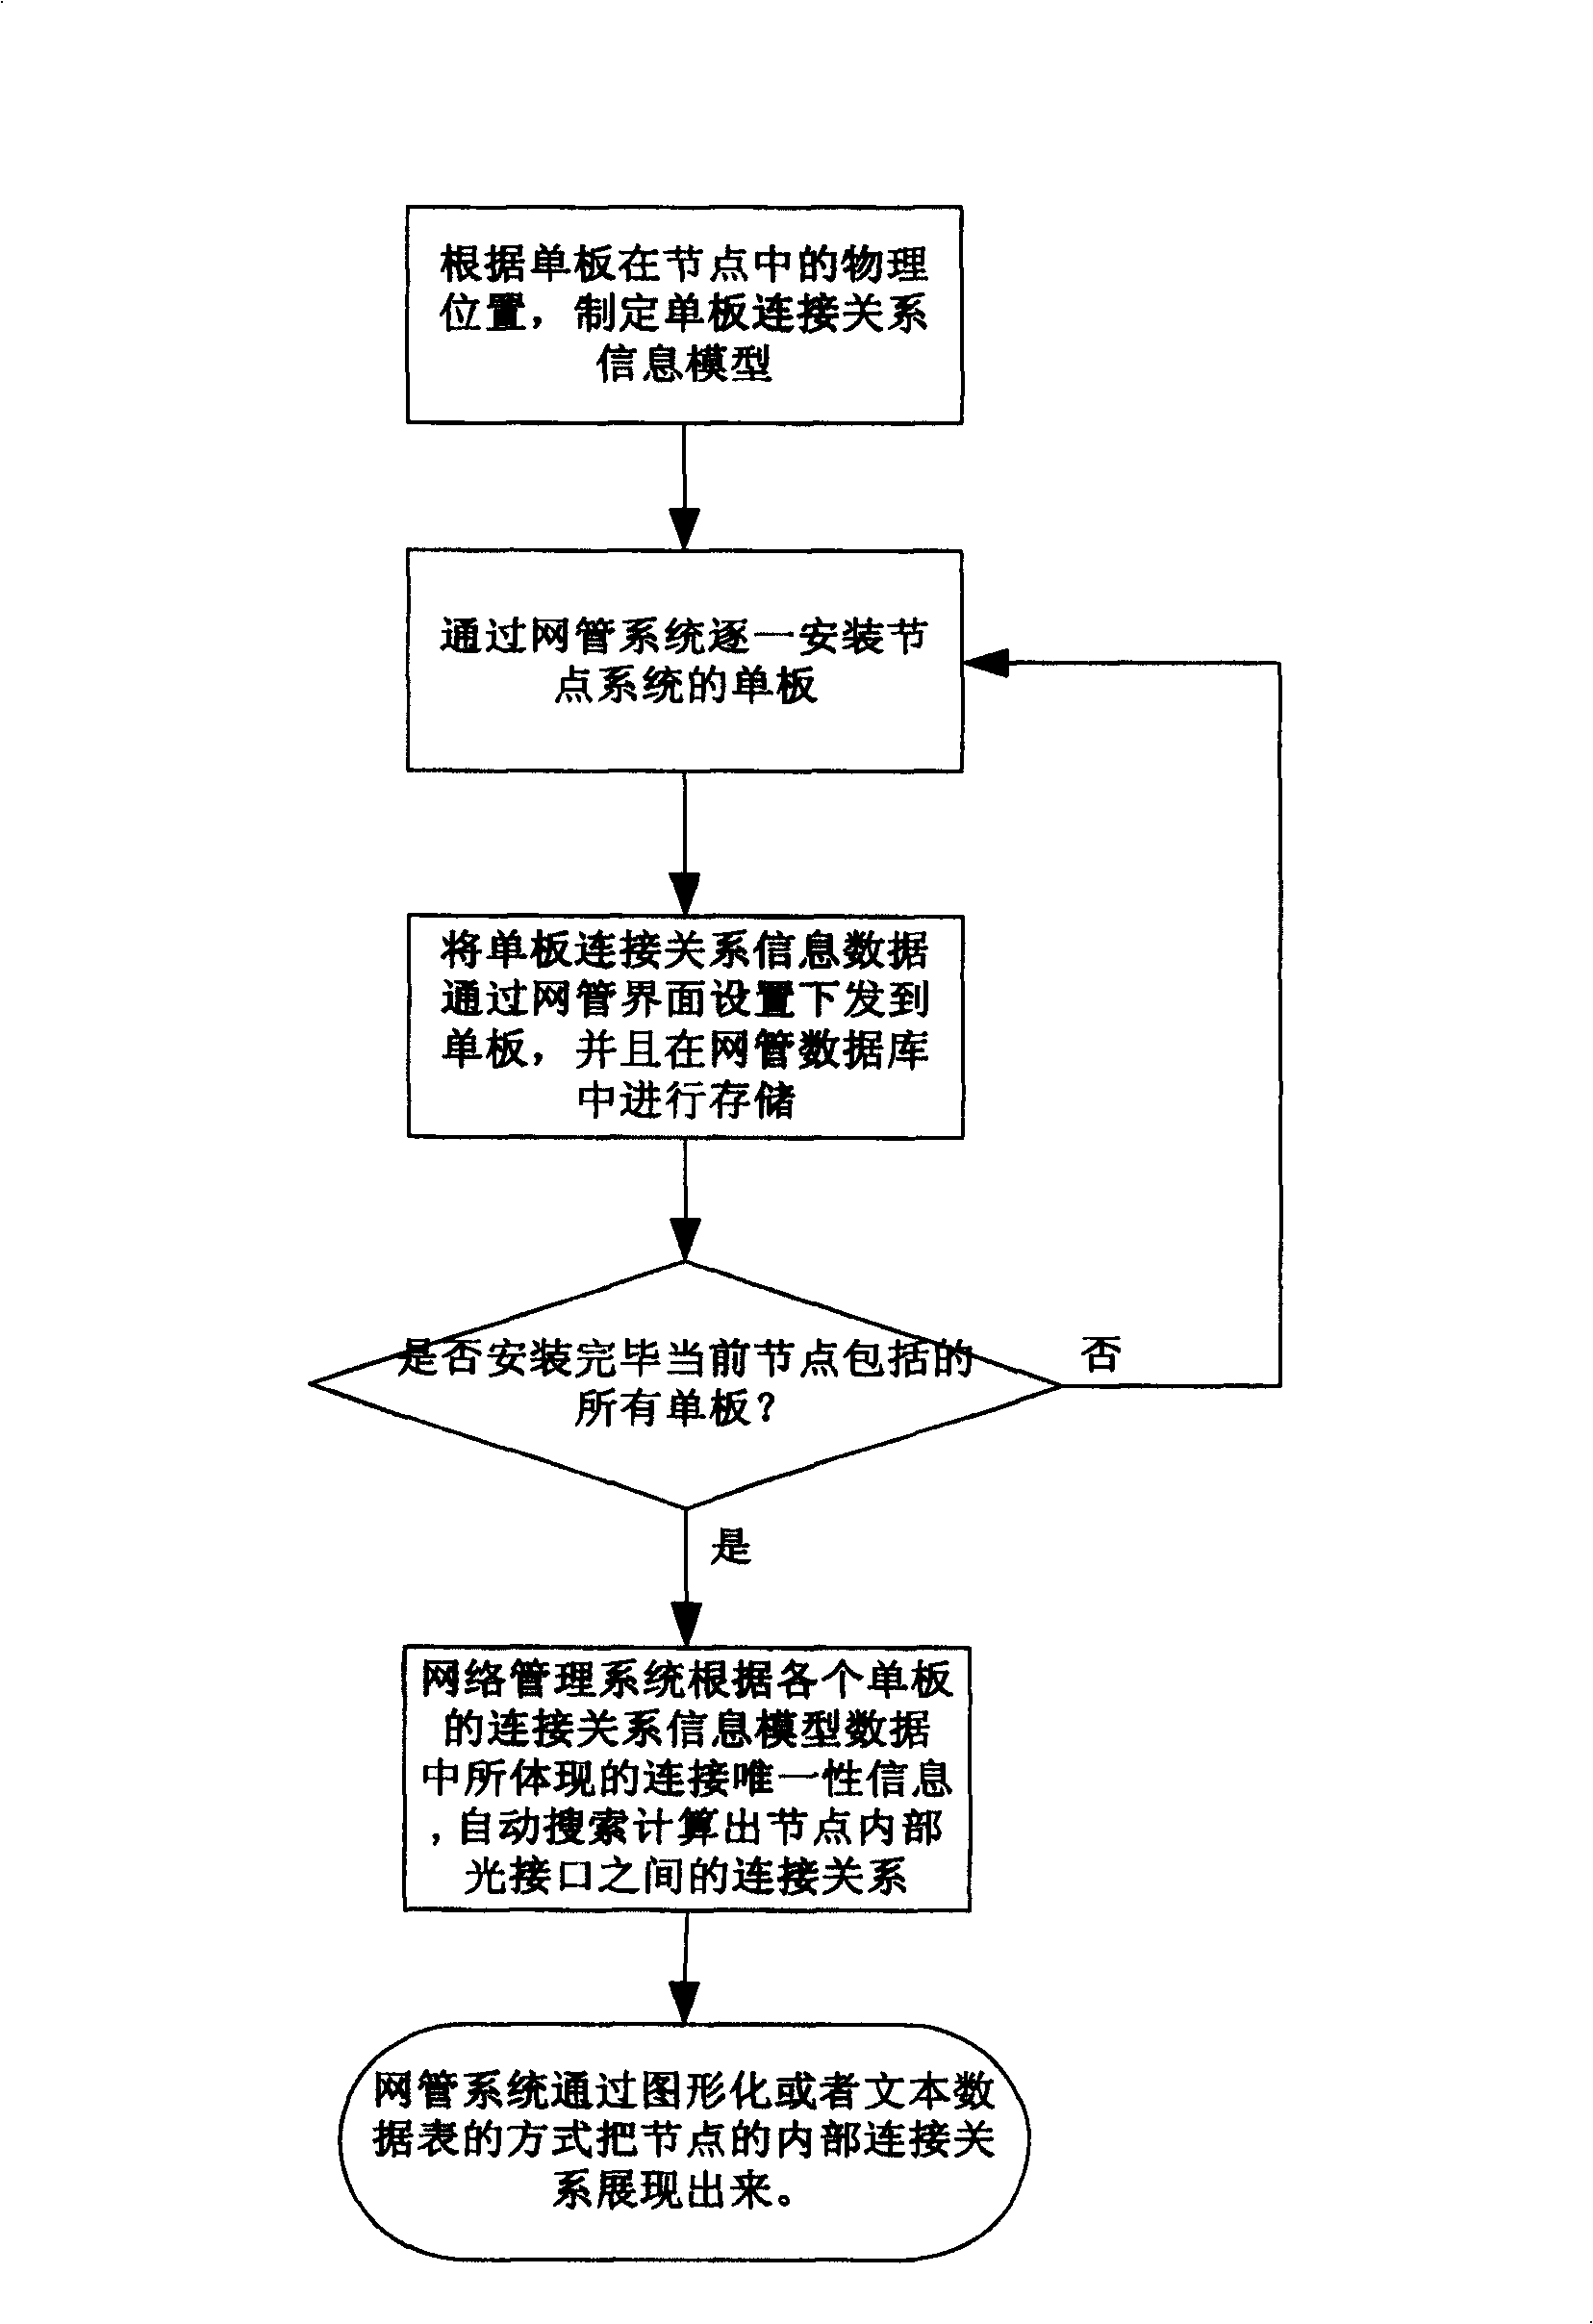 A method to automatically obtain inner connection relation of optical network node